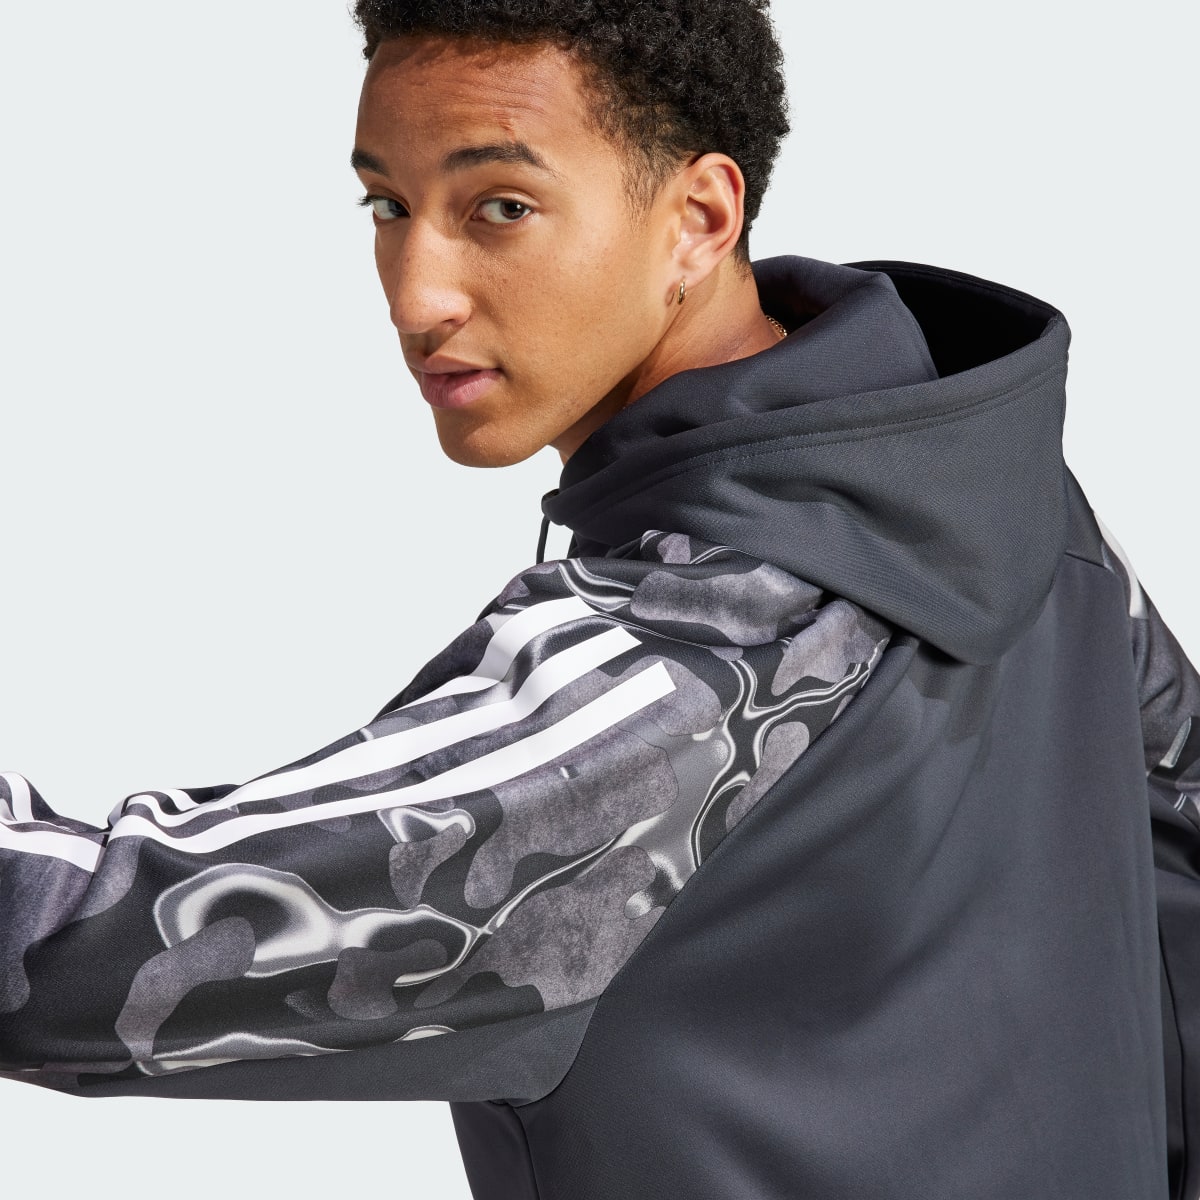 Adidas Future Icons Allover Print Hoodie. 7